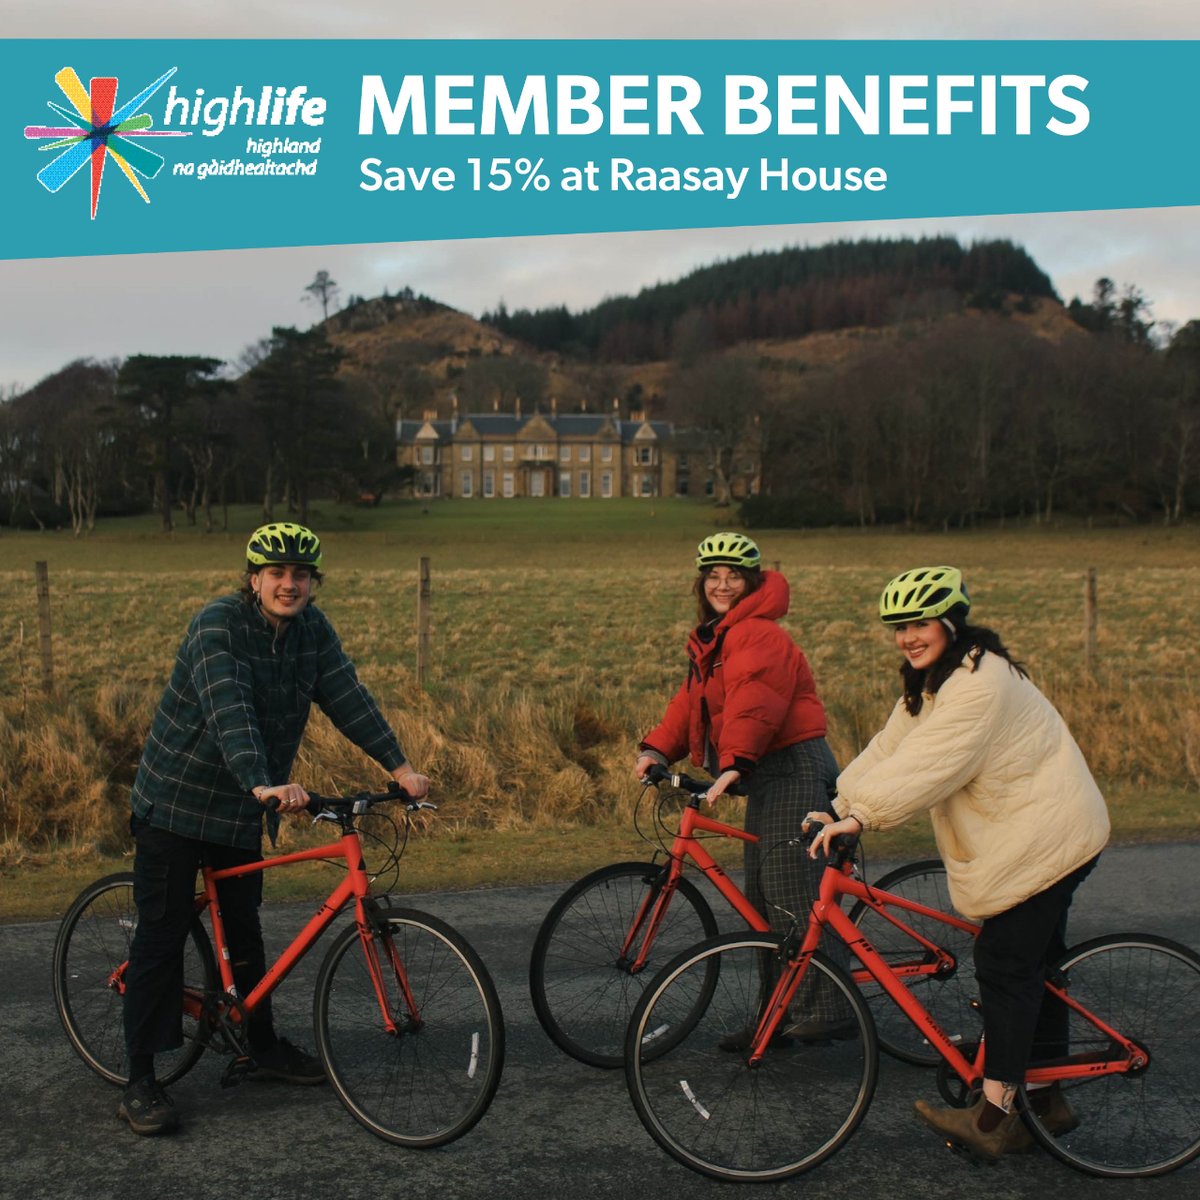 ⭐️ Member Benefits ⭐️ 🚲 Save 15% at Raasay House Discover more benefits with High Life Highland: hlh.scot/4466yTB #MemberBenefits #MakingLifeBetter